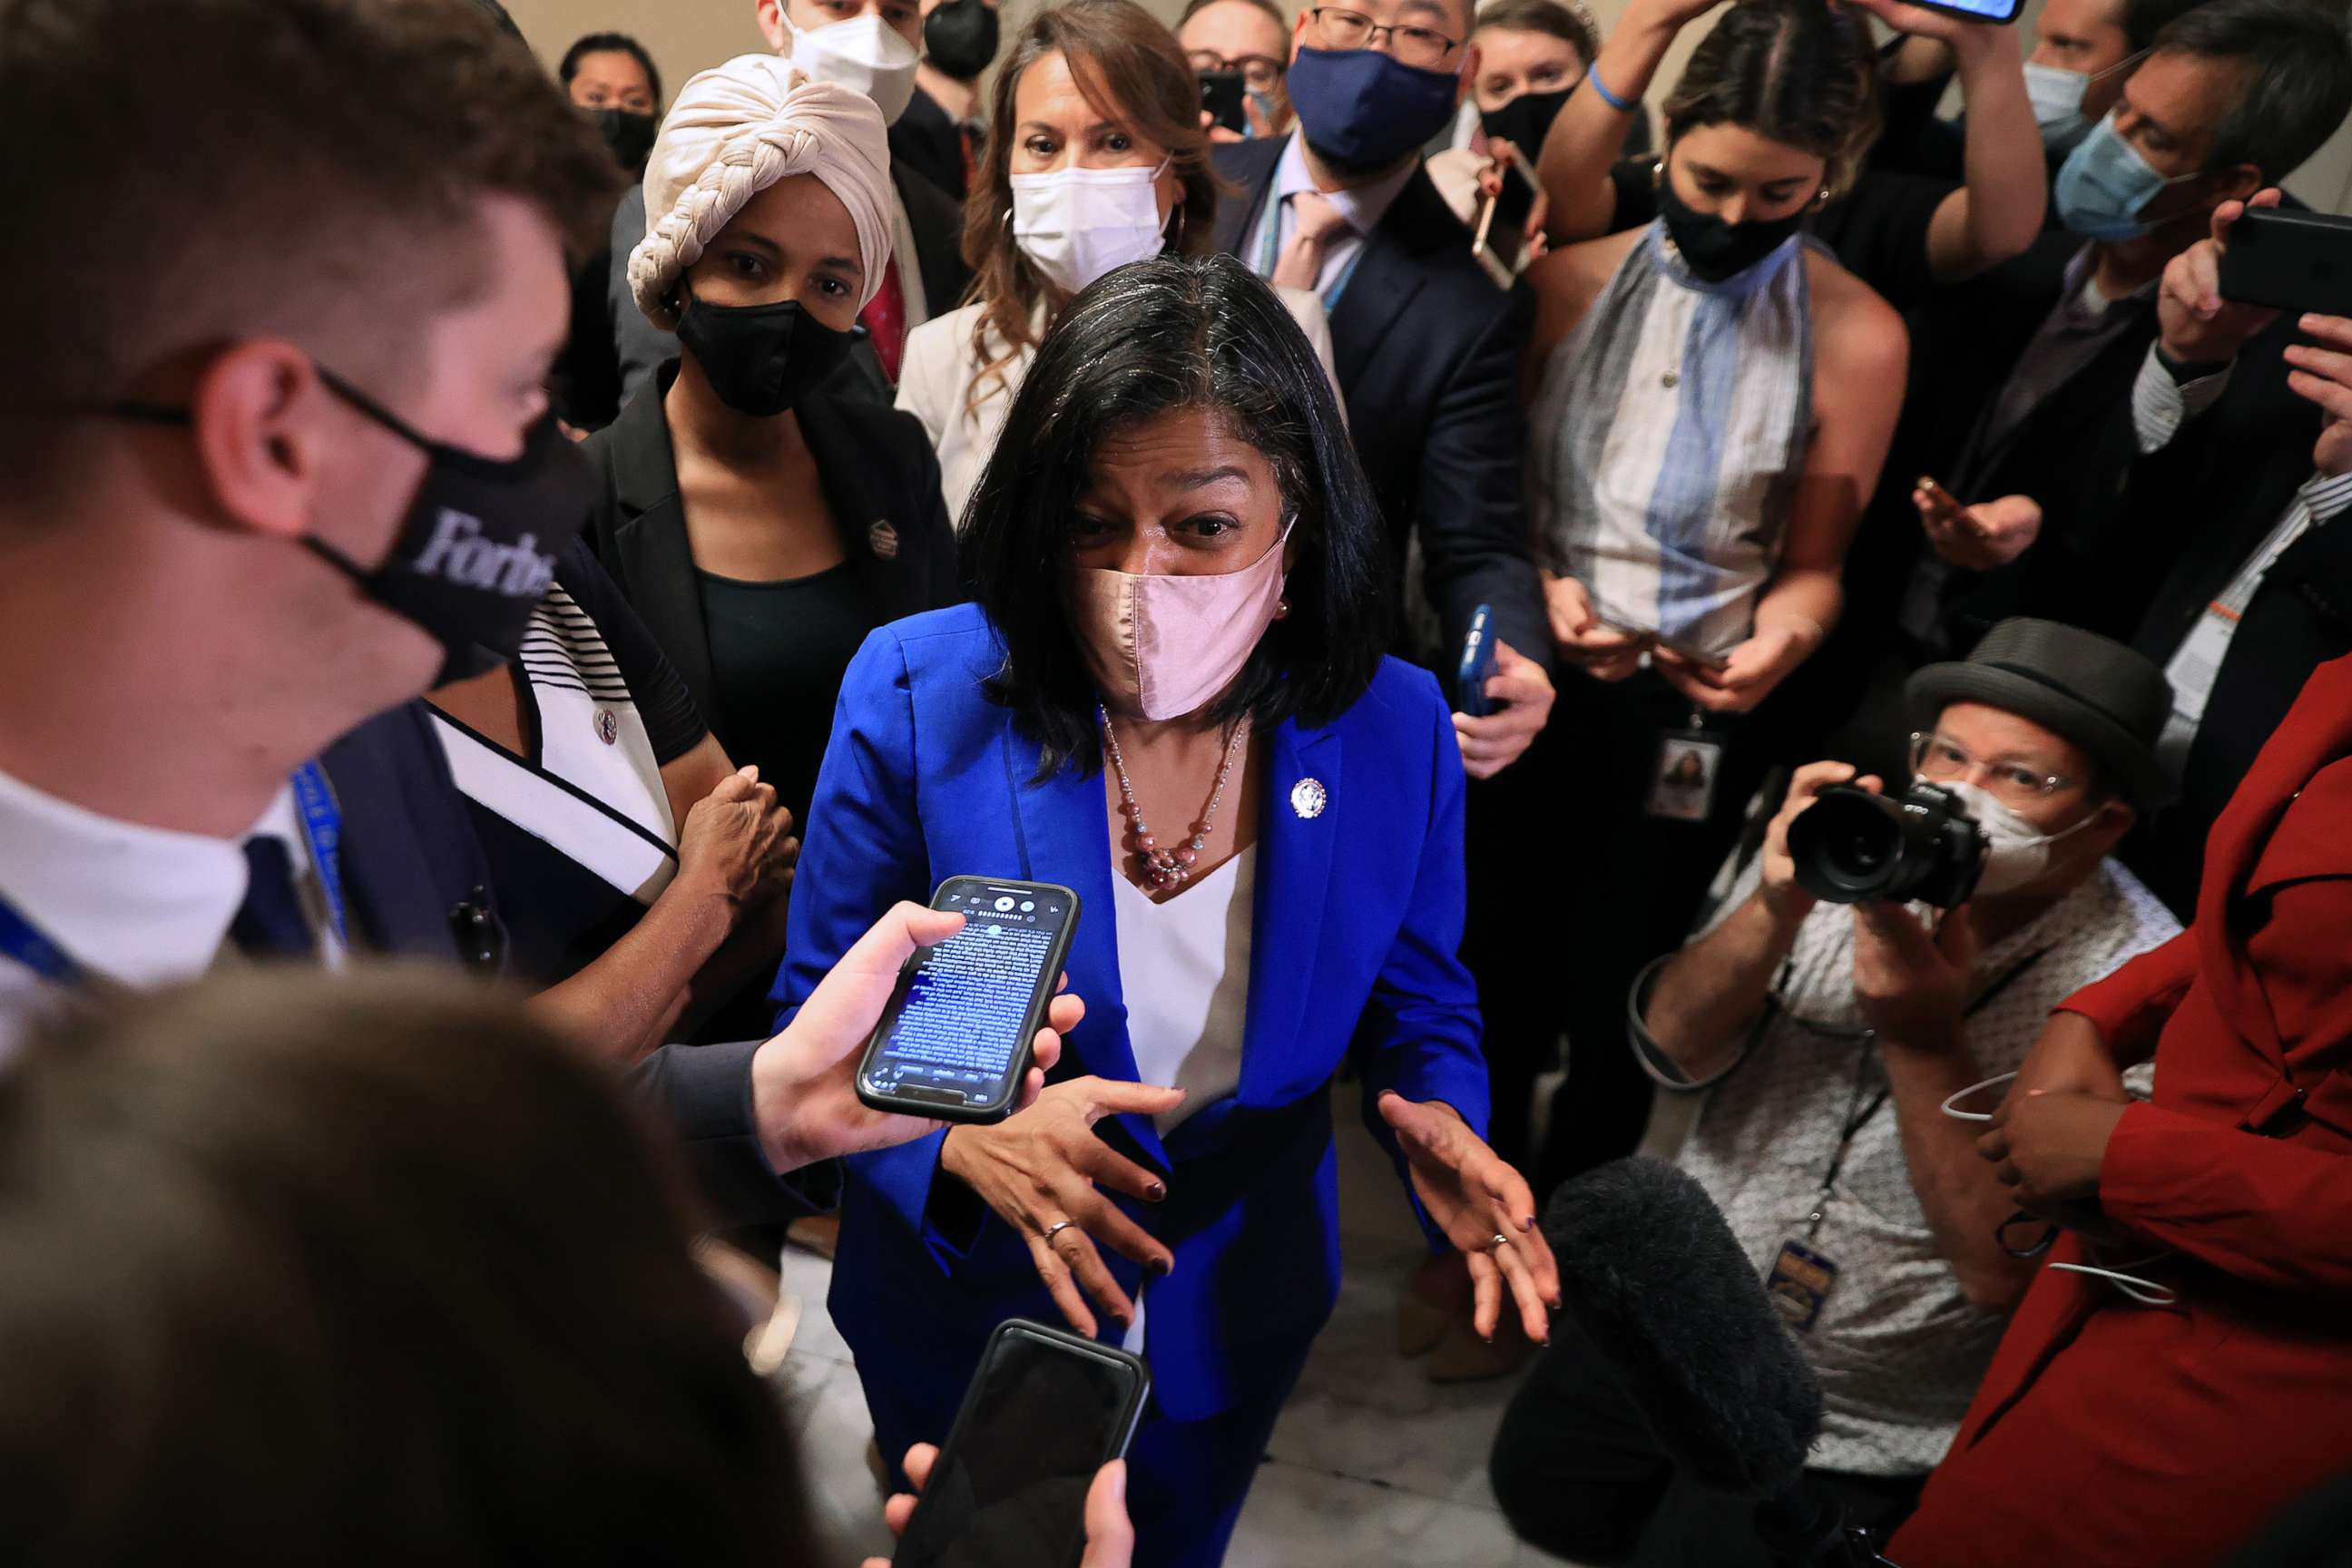 PHOTO: Congressional Progressive Caucus Chair Rep. Pramila Jayapal, Sen. Ilhan Omar, and Rep. Veronica Escobar talk to reporters after meeting with Speaker of the House Nancy Pelosi at the U.S. Capitol on Sept. 30, 2021, in Washington, D.C.